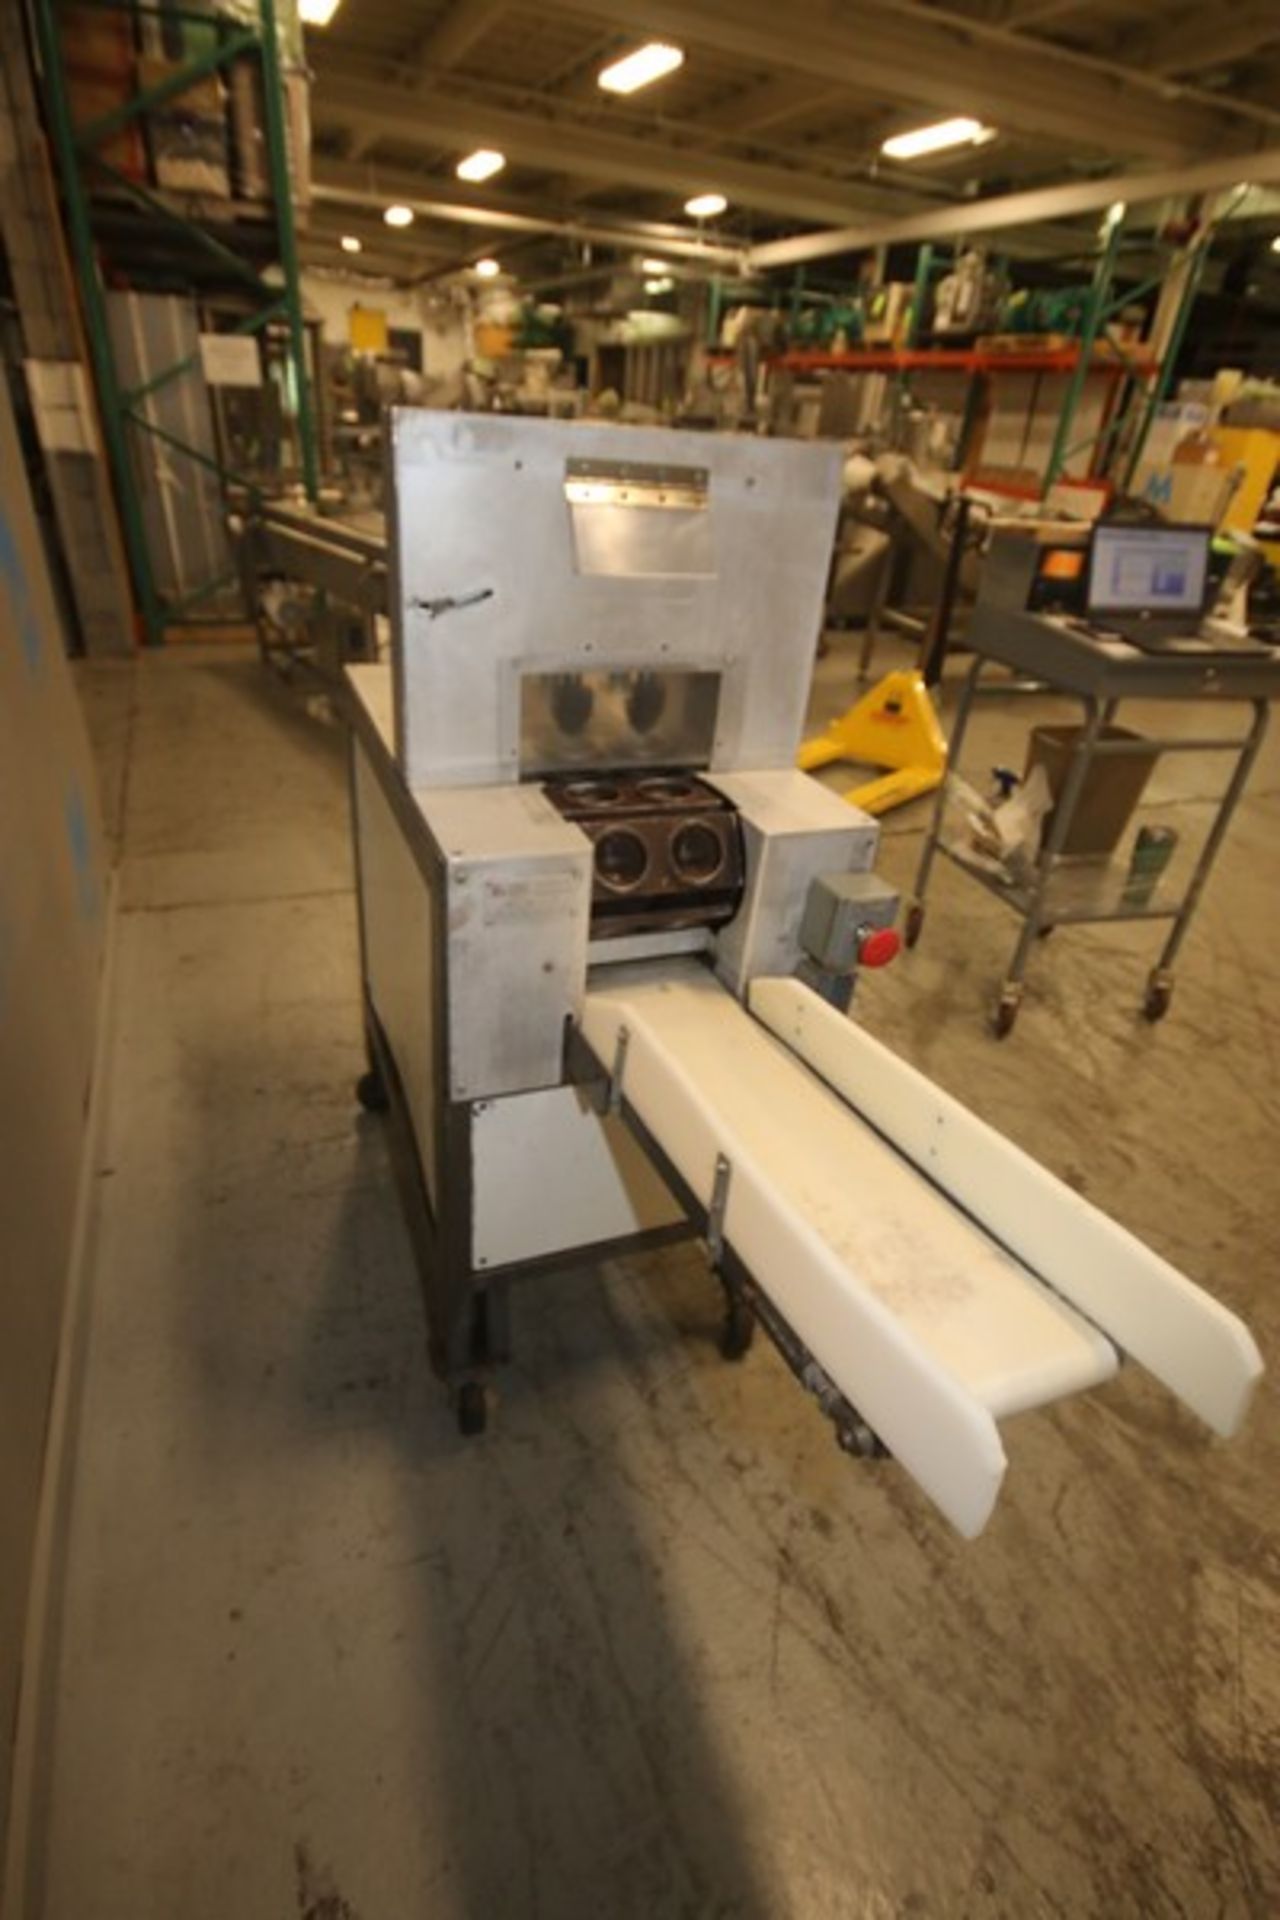 Cinelli 2-Lane Kaiser Roll Dough Press M/N CG 182, S/N 000H-774, 115 Volts, 1 Phase, with Aprox. 8- - Image 6 of 9